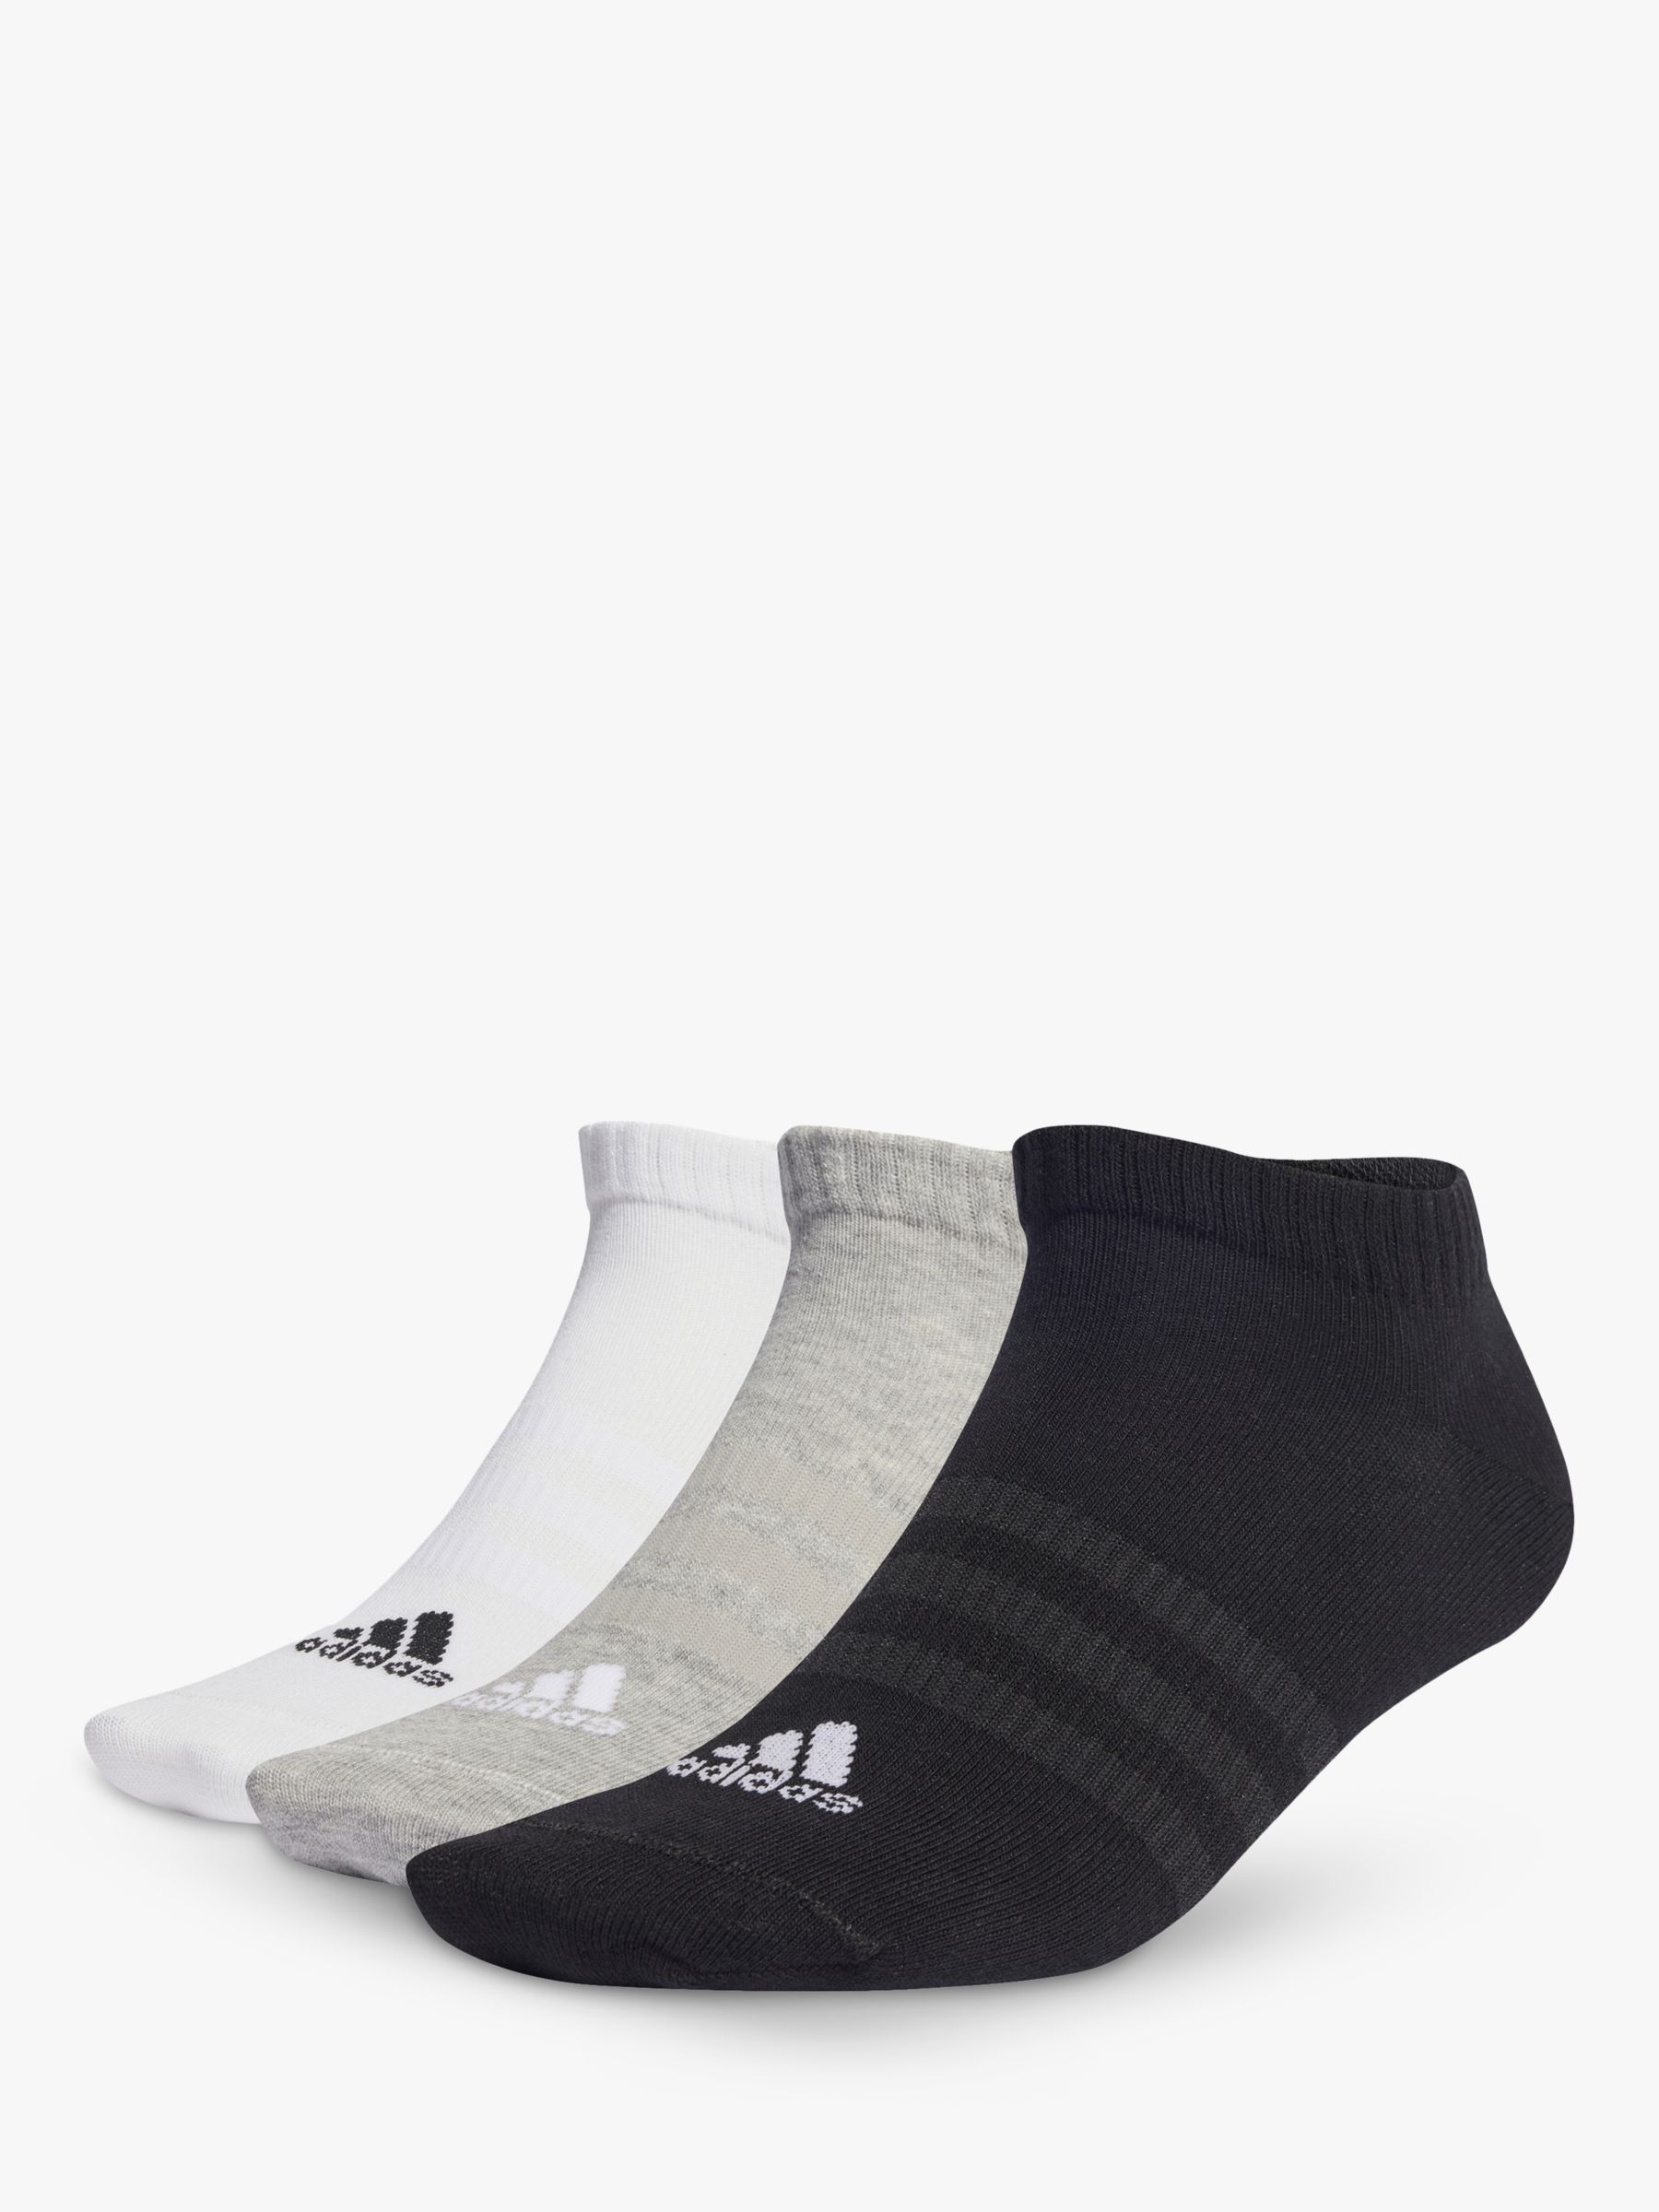 Buy adidas Thin and Light Low-Cut Socks, Pack of 3 Online at johnlewis.com